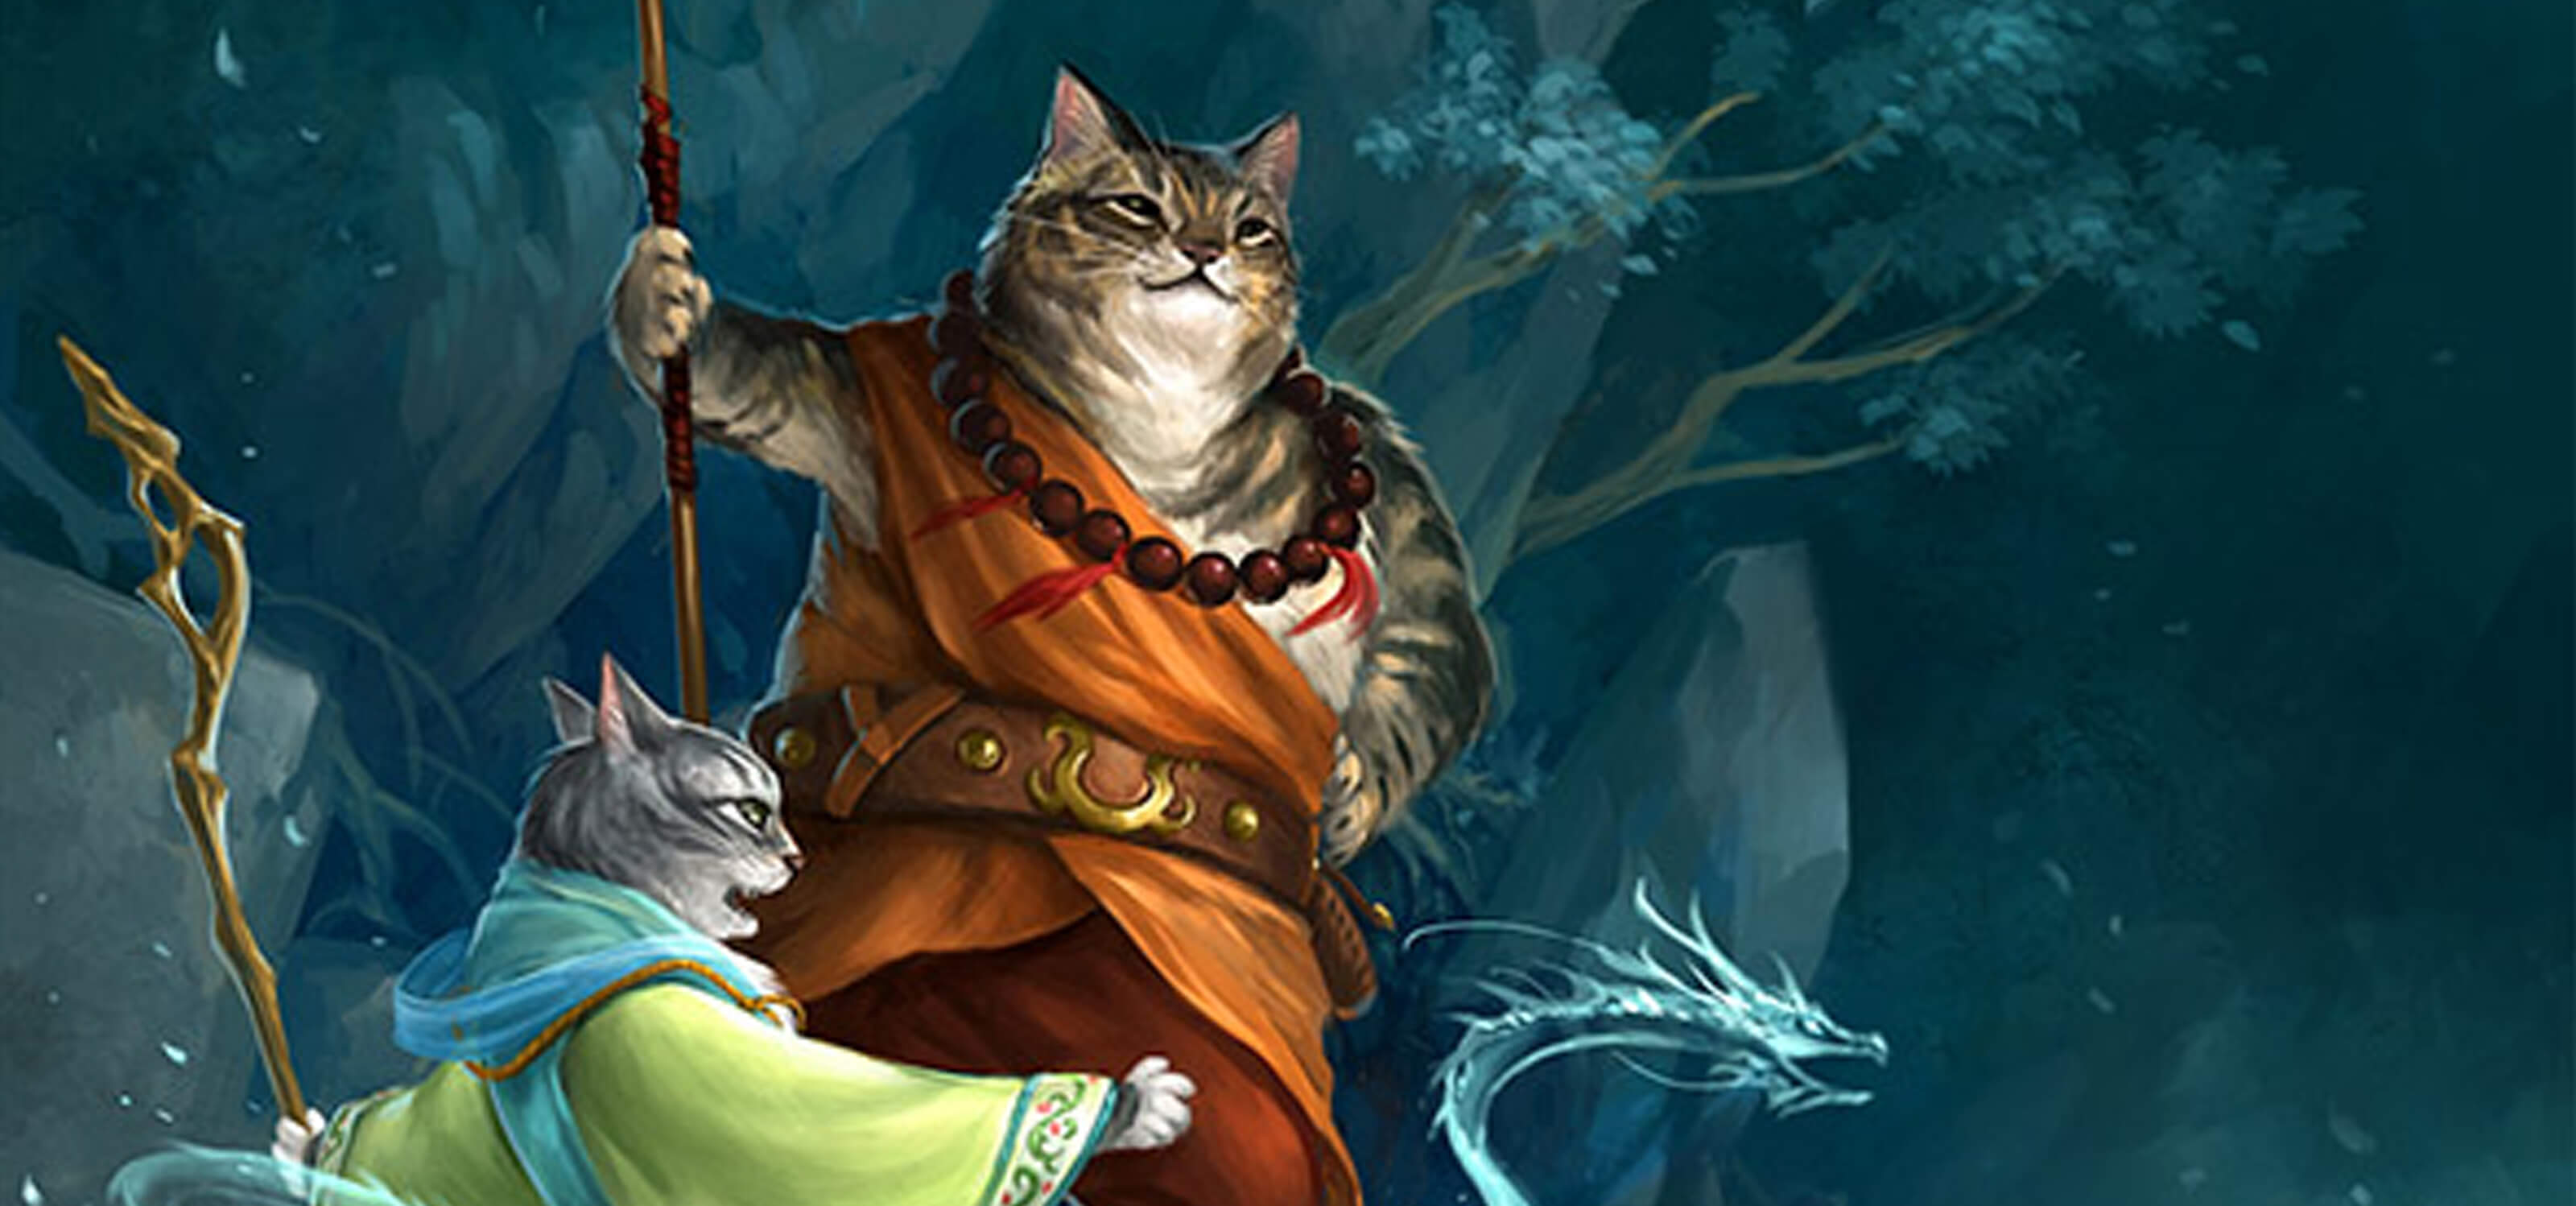 Three illustrated housecats are dressed in fantasy garb, holding staves, casting spells, and preparing to attack